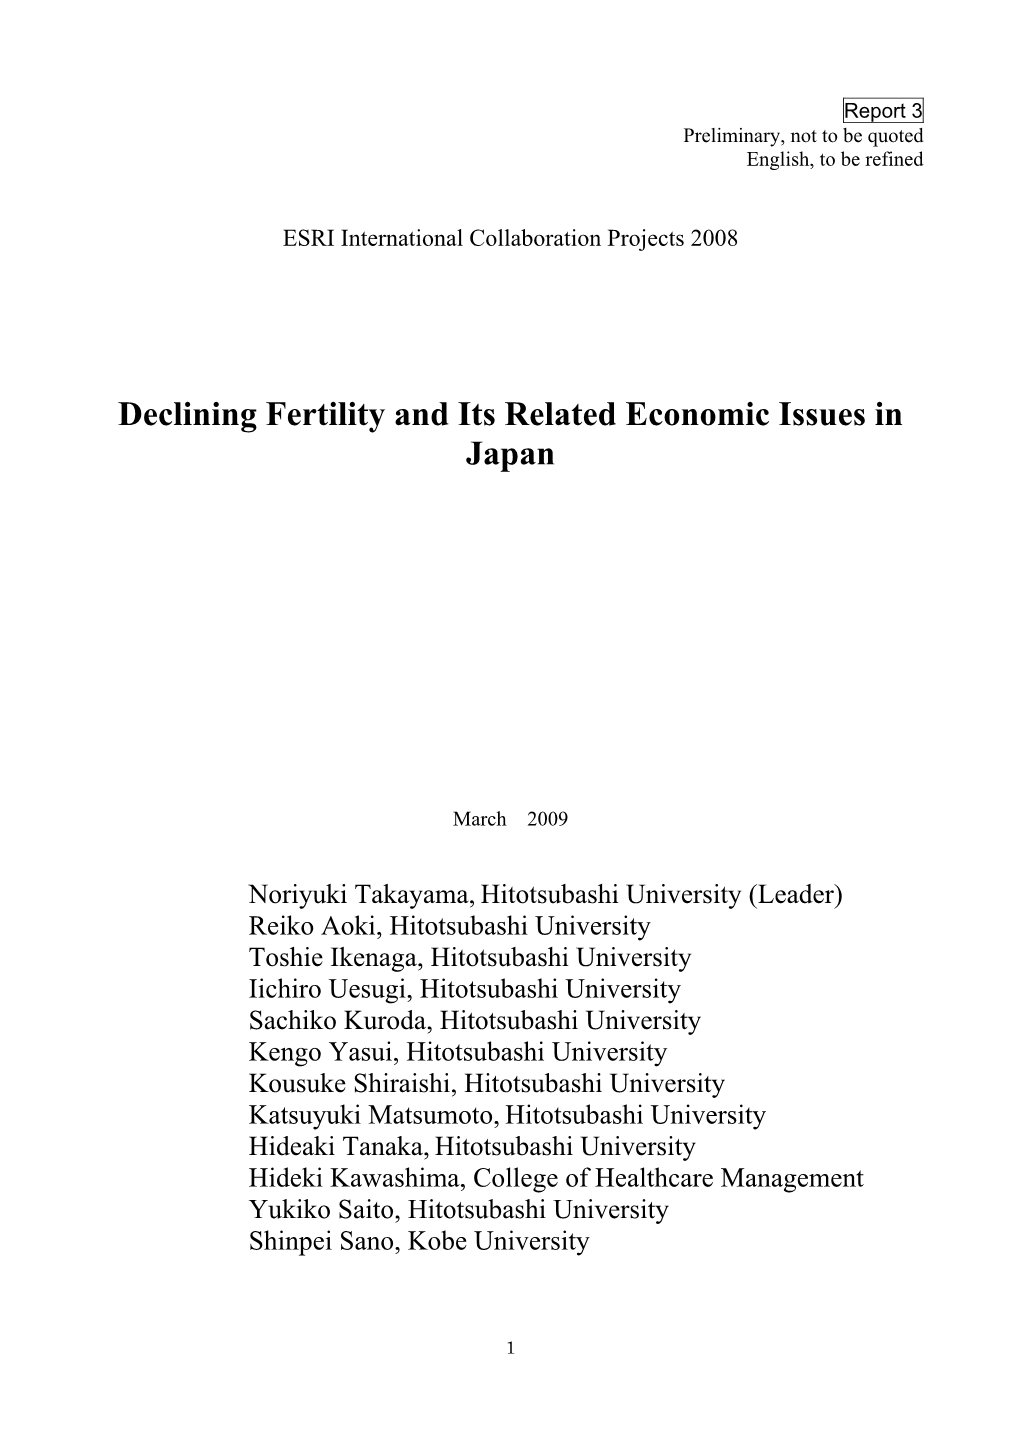 Declining Fertility and Its Related Economic Issues in Japan